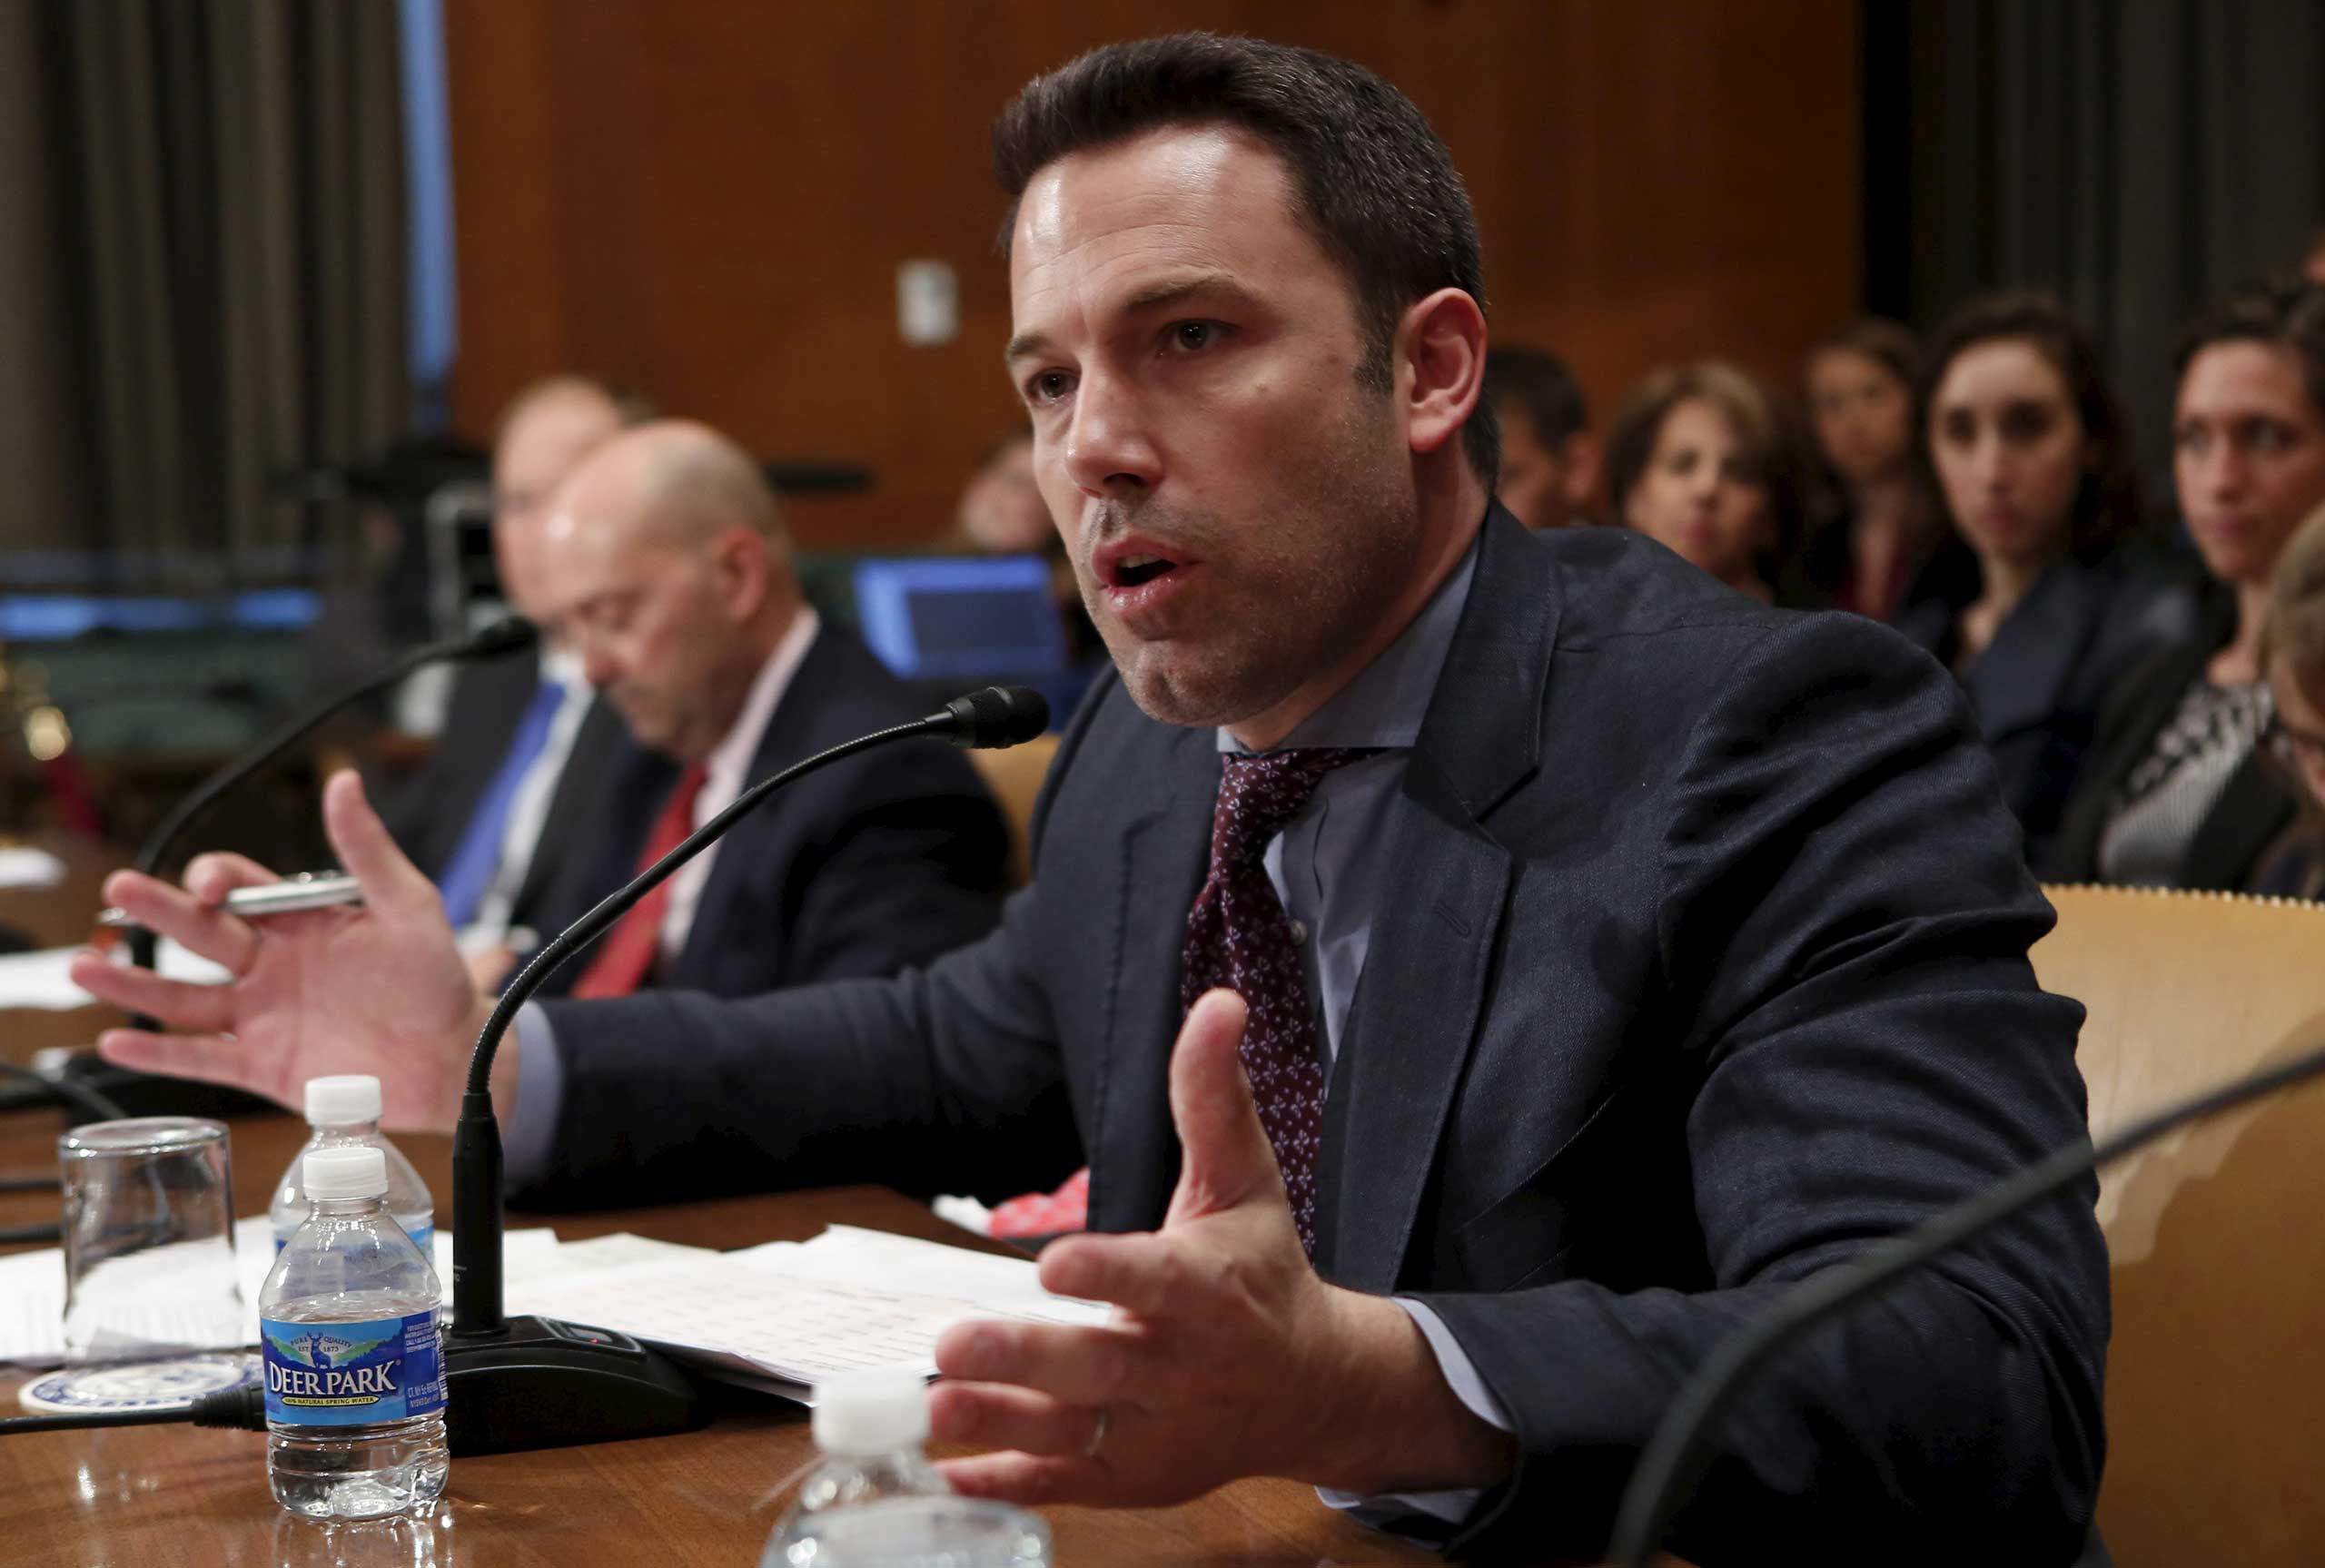 Ben Affleck, actor, filmmaker and founder of the Eastern Congo Initiative, testifies before a Senate Appropriations State, Foreign Operations and Related Programs Subcommittee hearing on "Diplomacy, Development, and National Security" on Capitol Hill in Washington March 26, 2015.